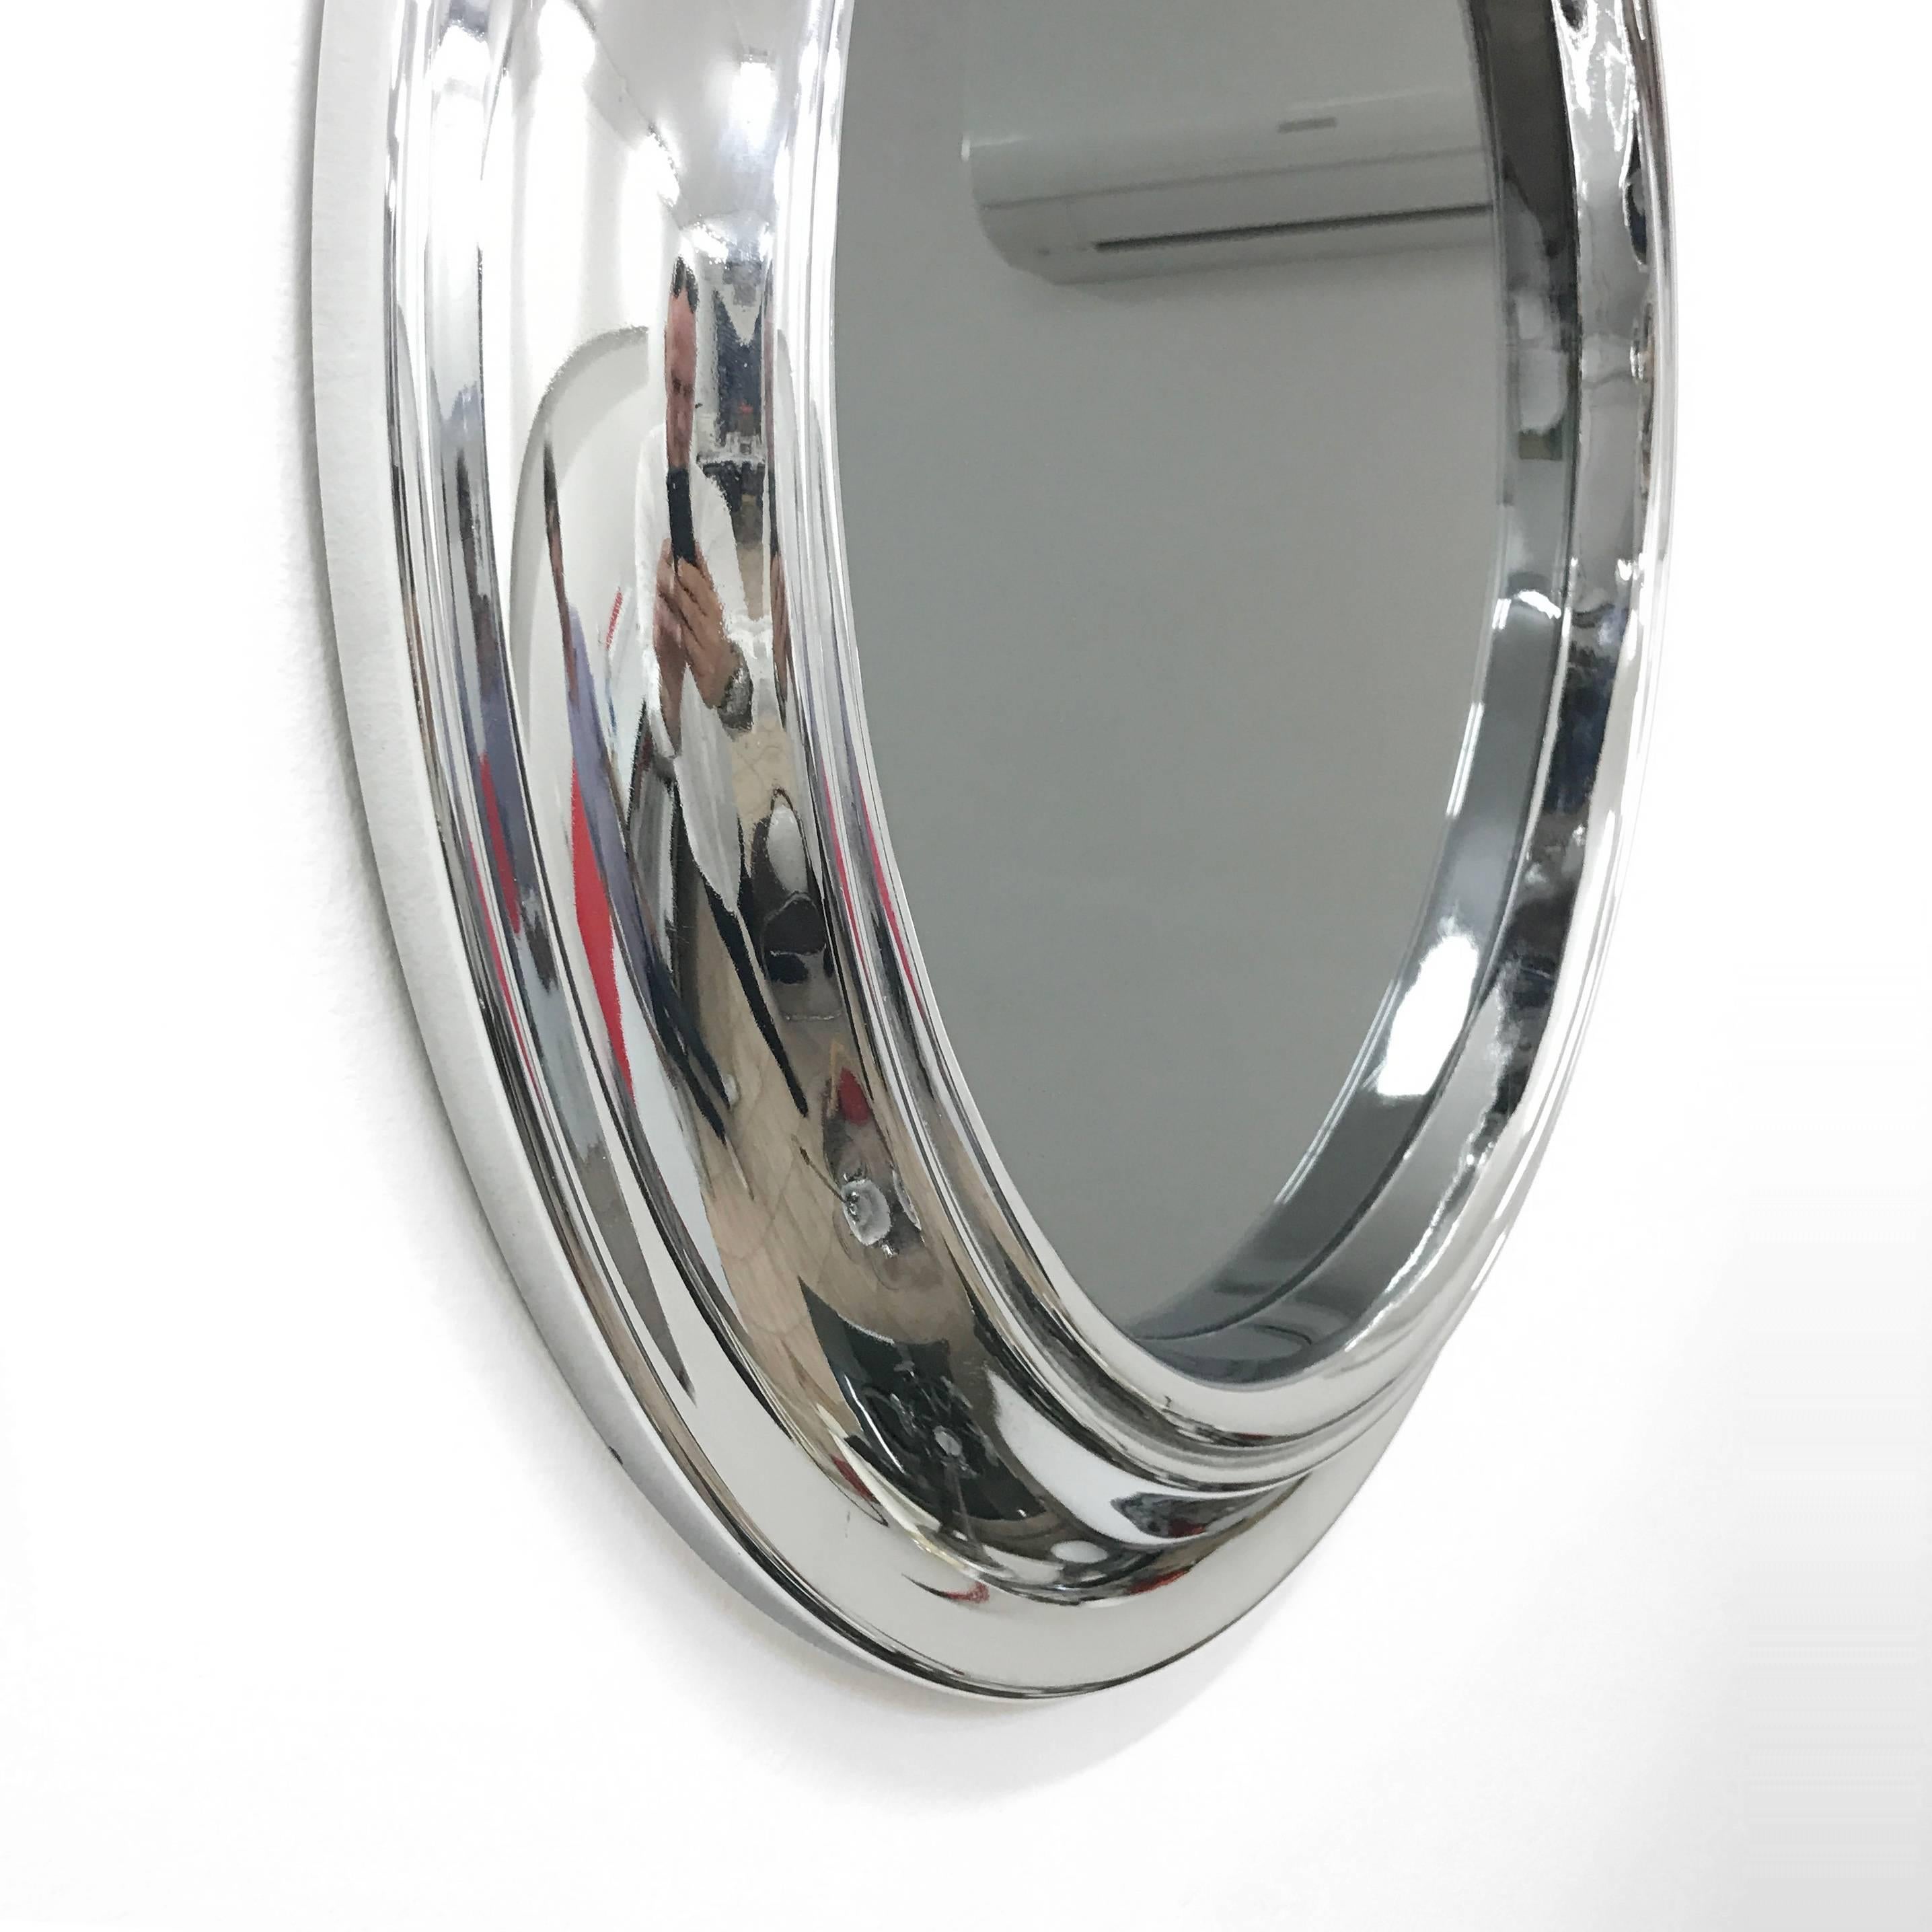 Italian Round Smoked Mirror, Chromed Vintage, Italy, 1960s, Midcentury, Wall Mirror For Sale